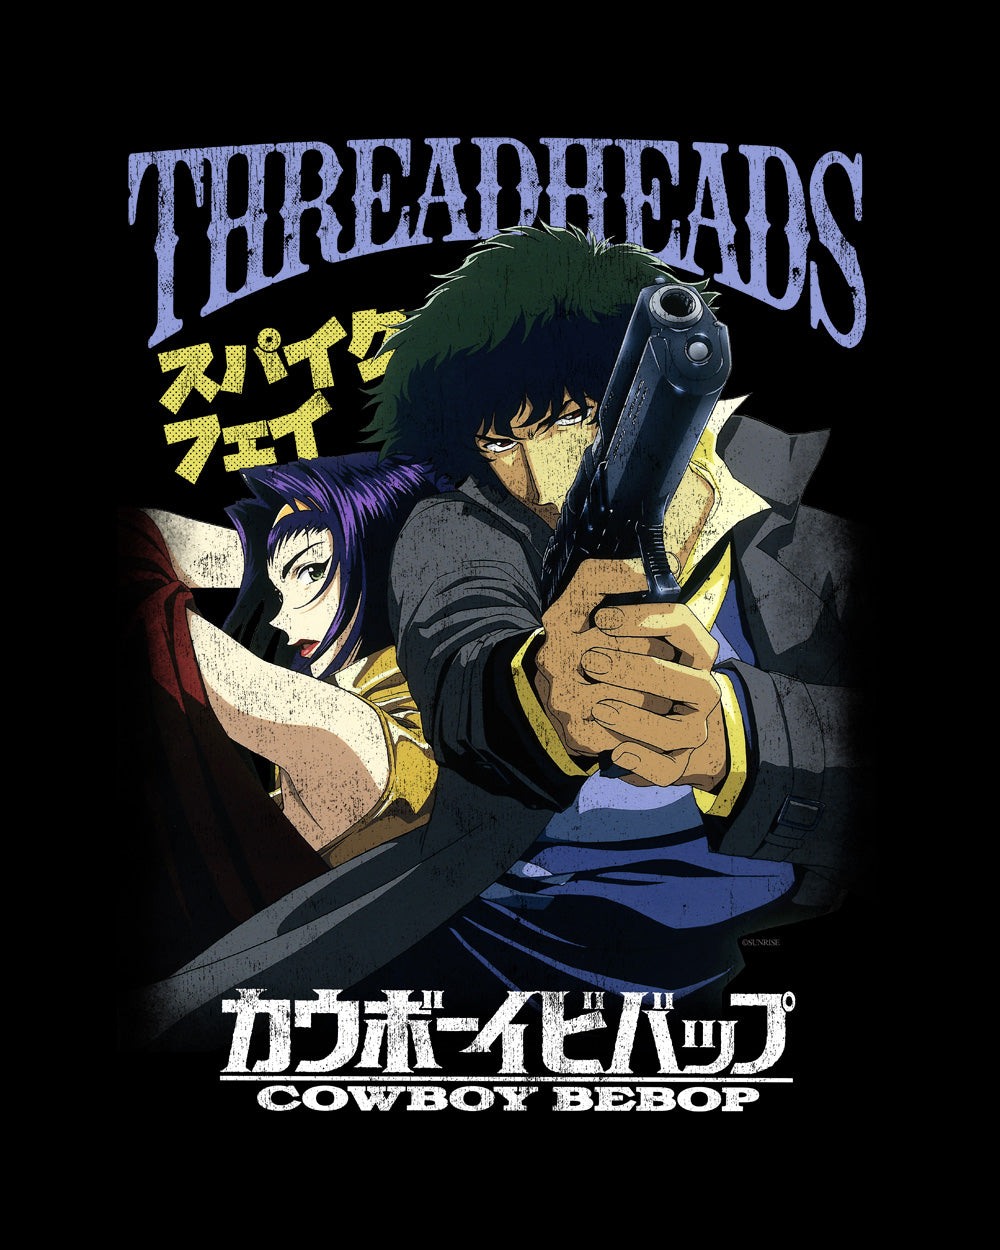 Cowboy Bebop Spike and Faye Officially Licensed Japanese Anime Sci-Fi 90s Adventure Cartoon Cotton T-Shirt